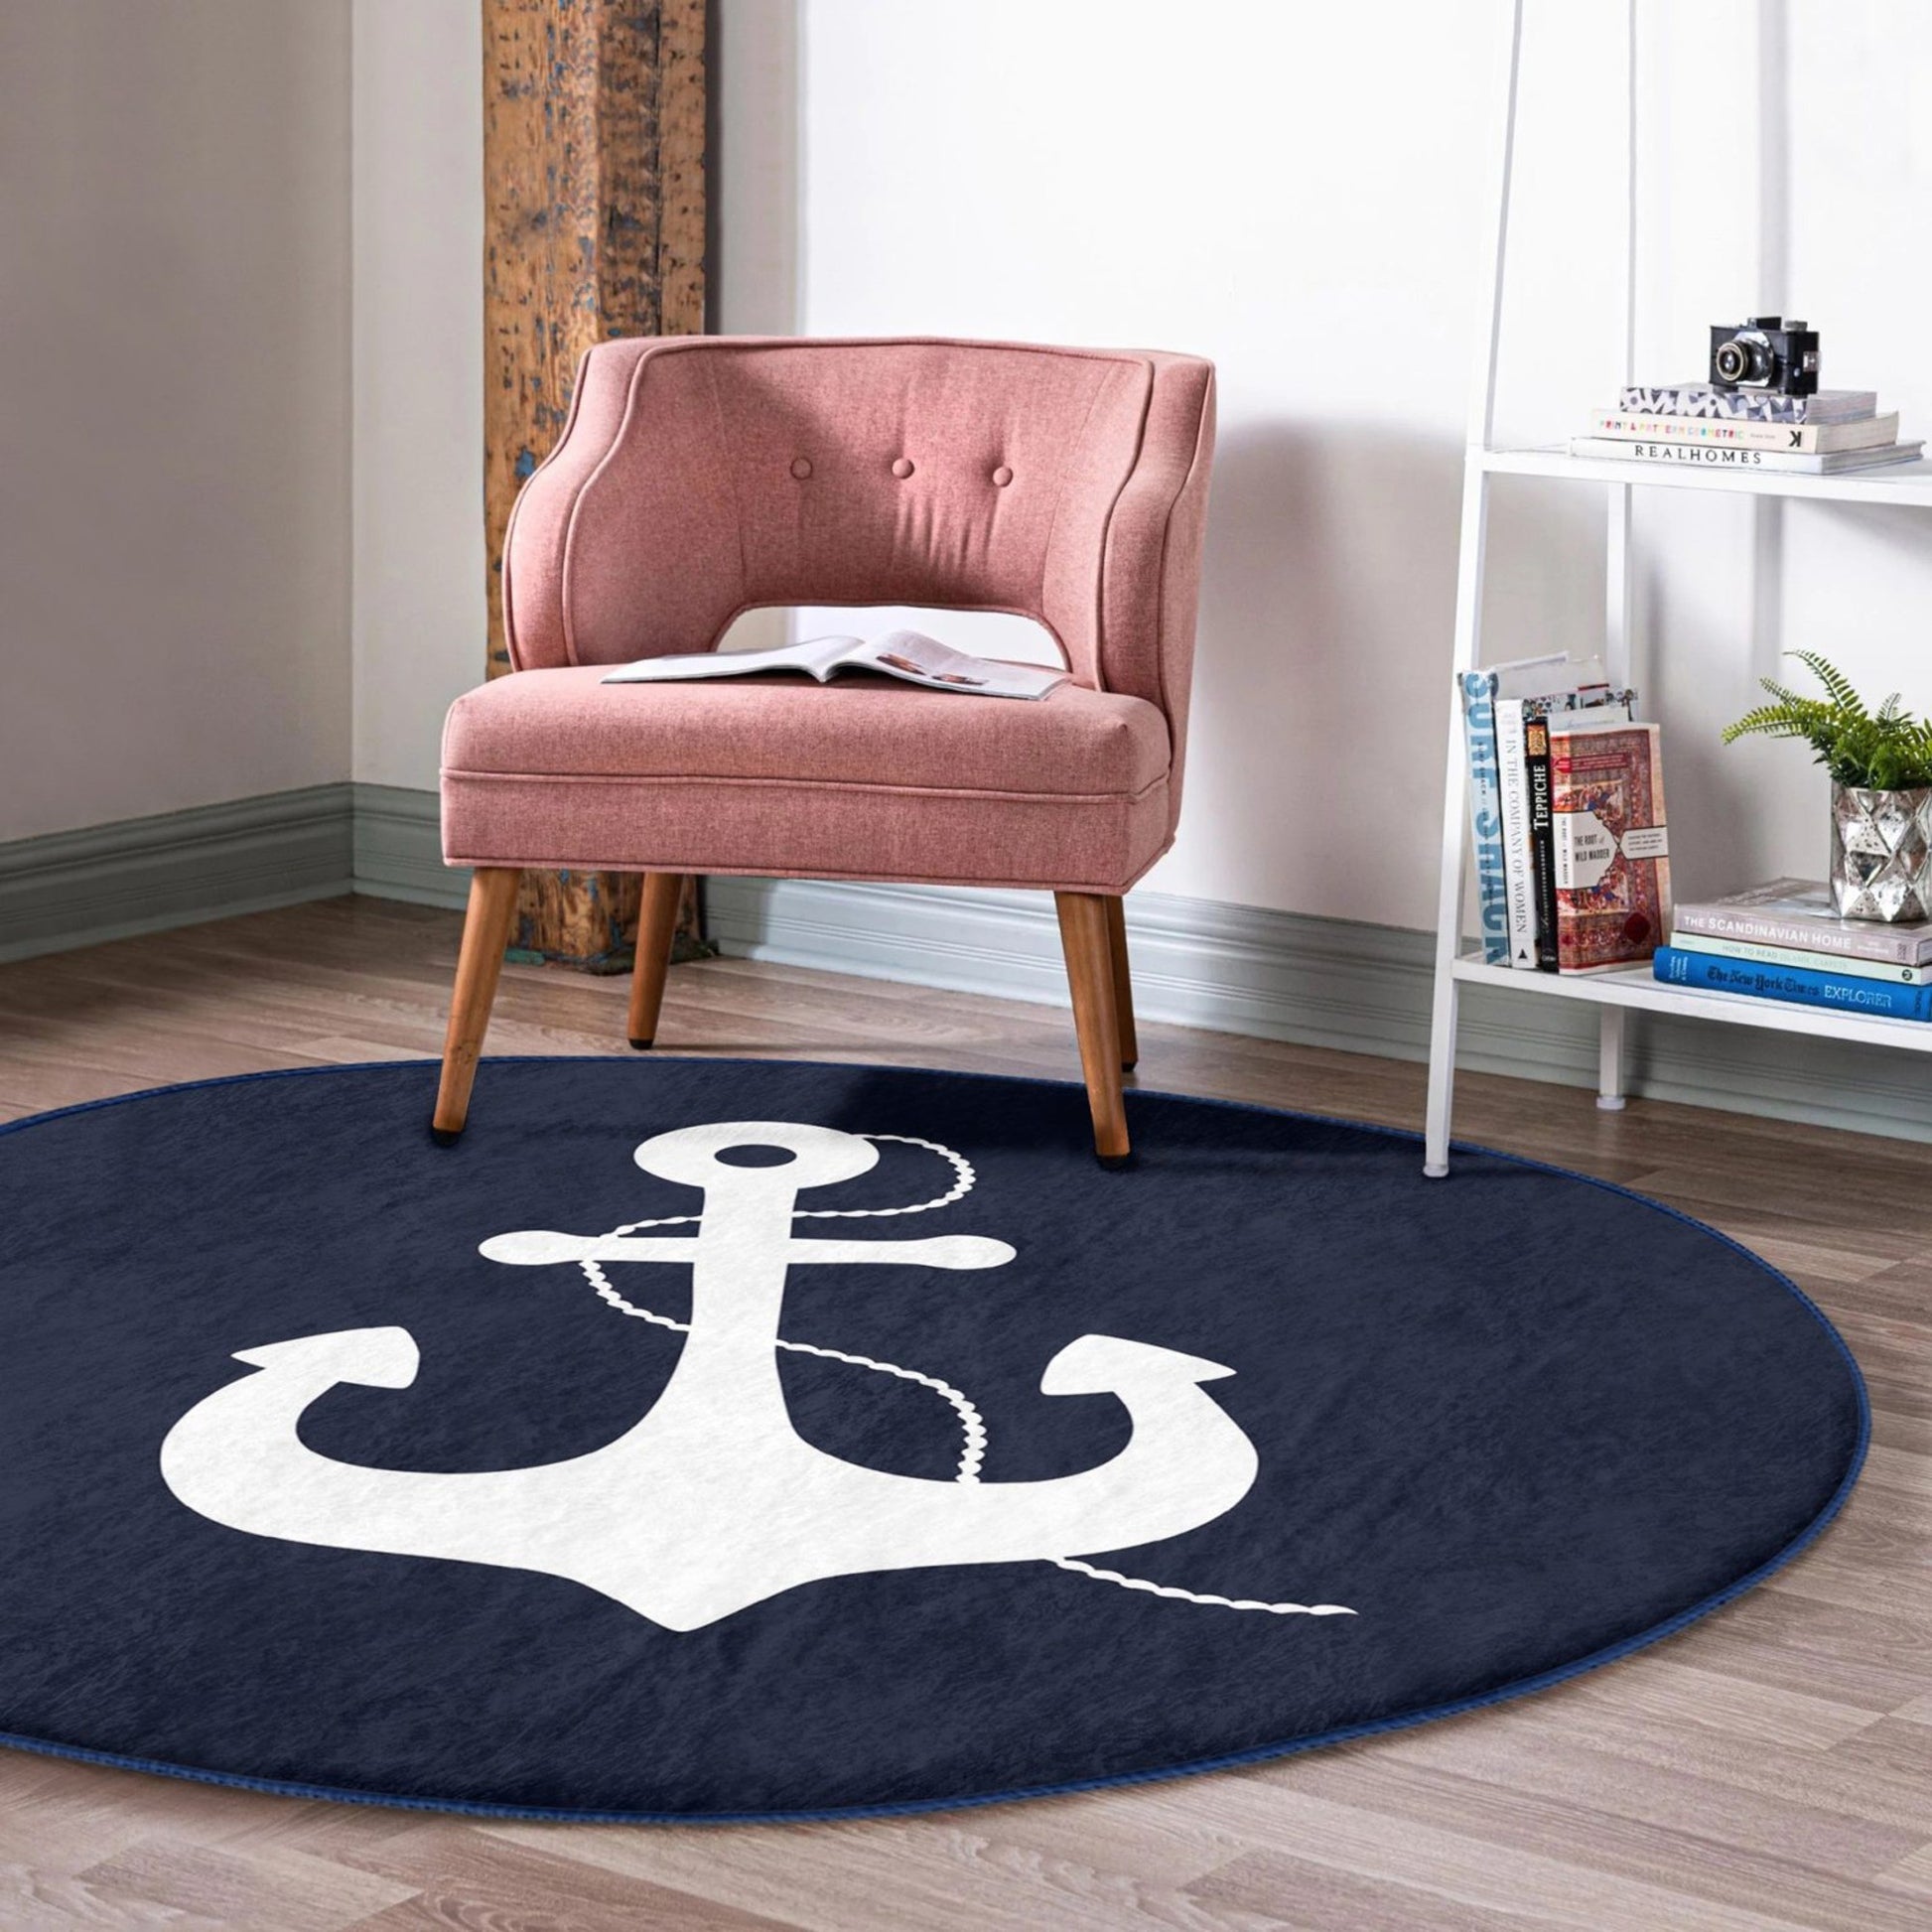 Washable Rug with Anchor Pattern - Easy Maintenance